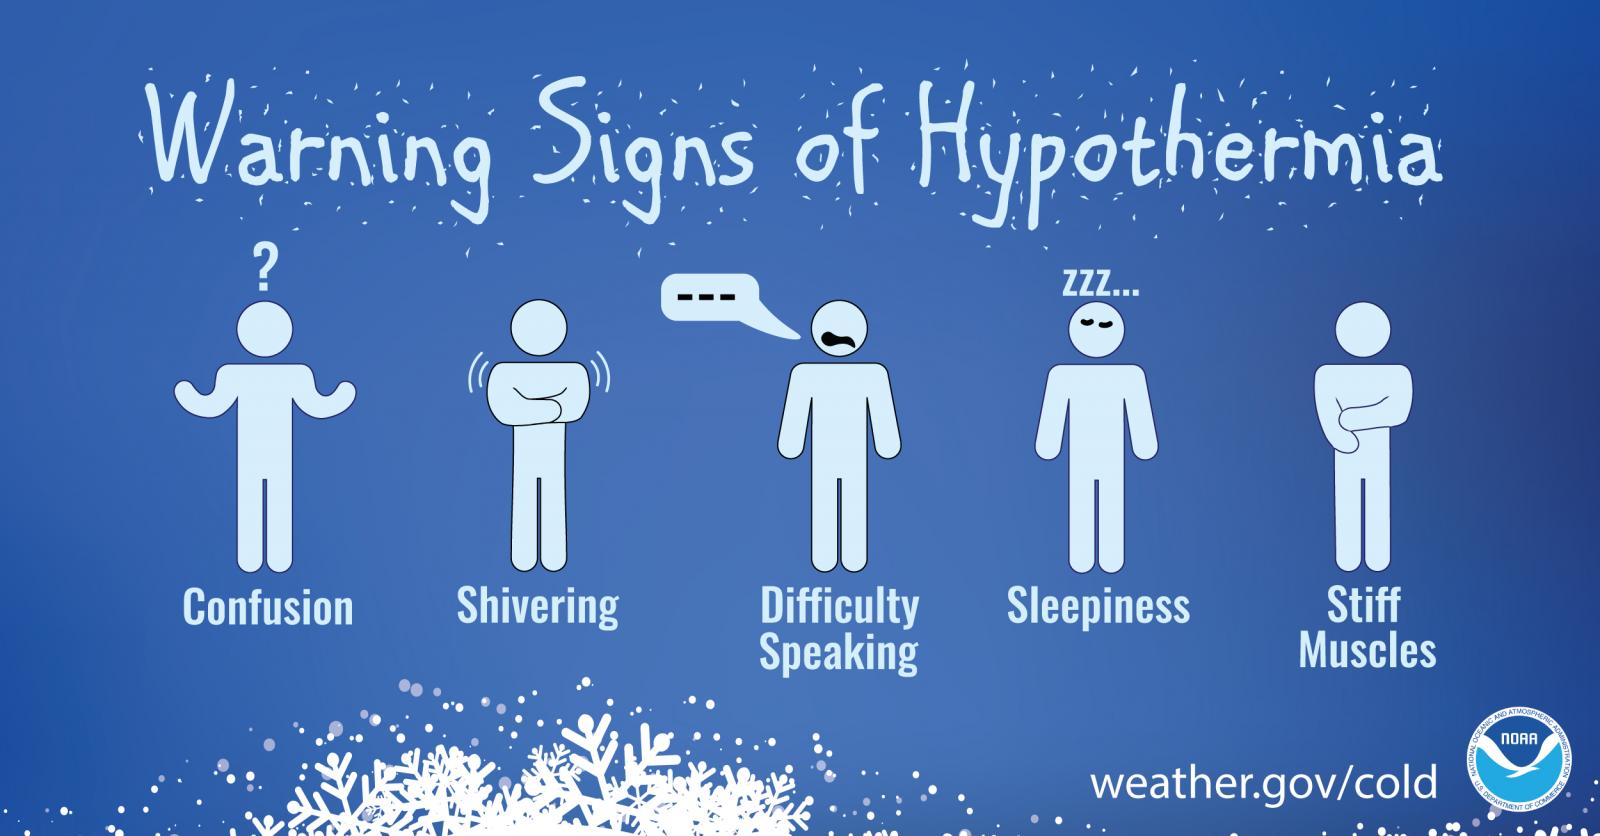 Warning signs of hypothermia include confusion, shivering, difficulty speaking, sleepiness, and stiff muscles